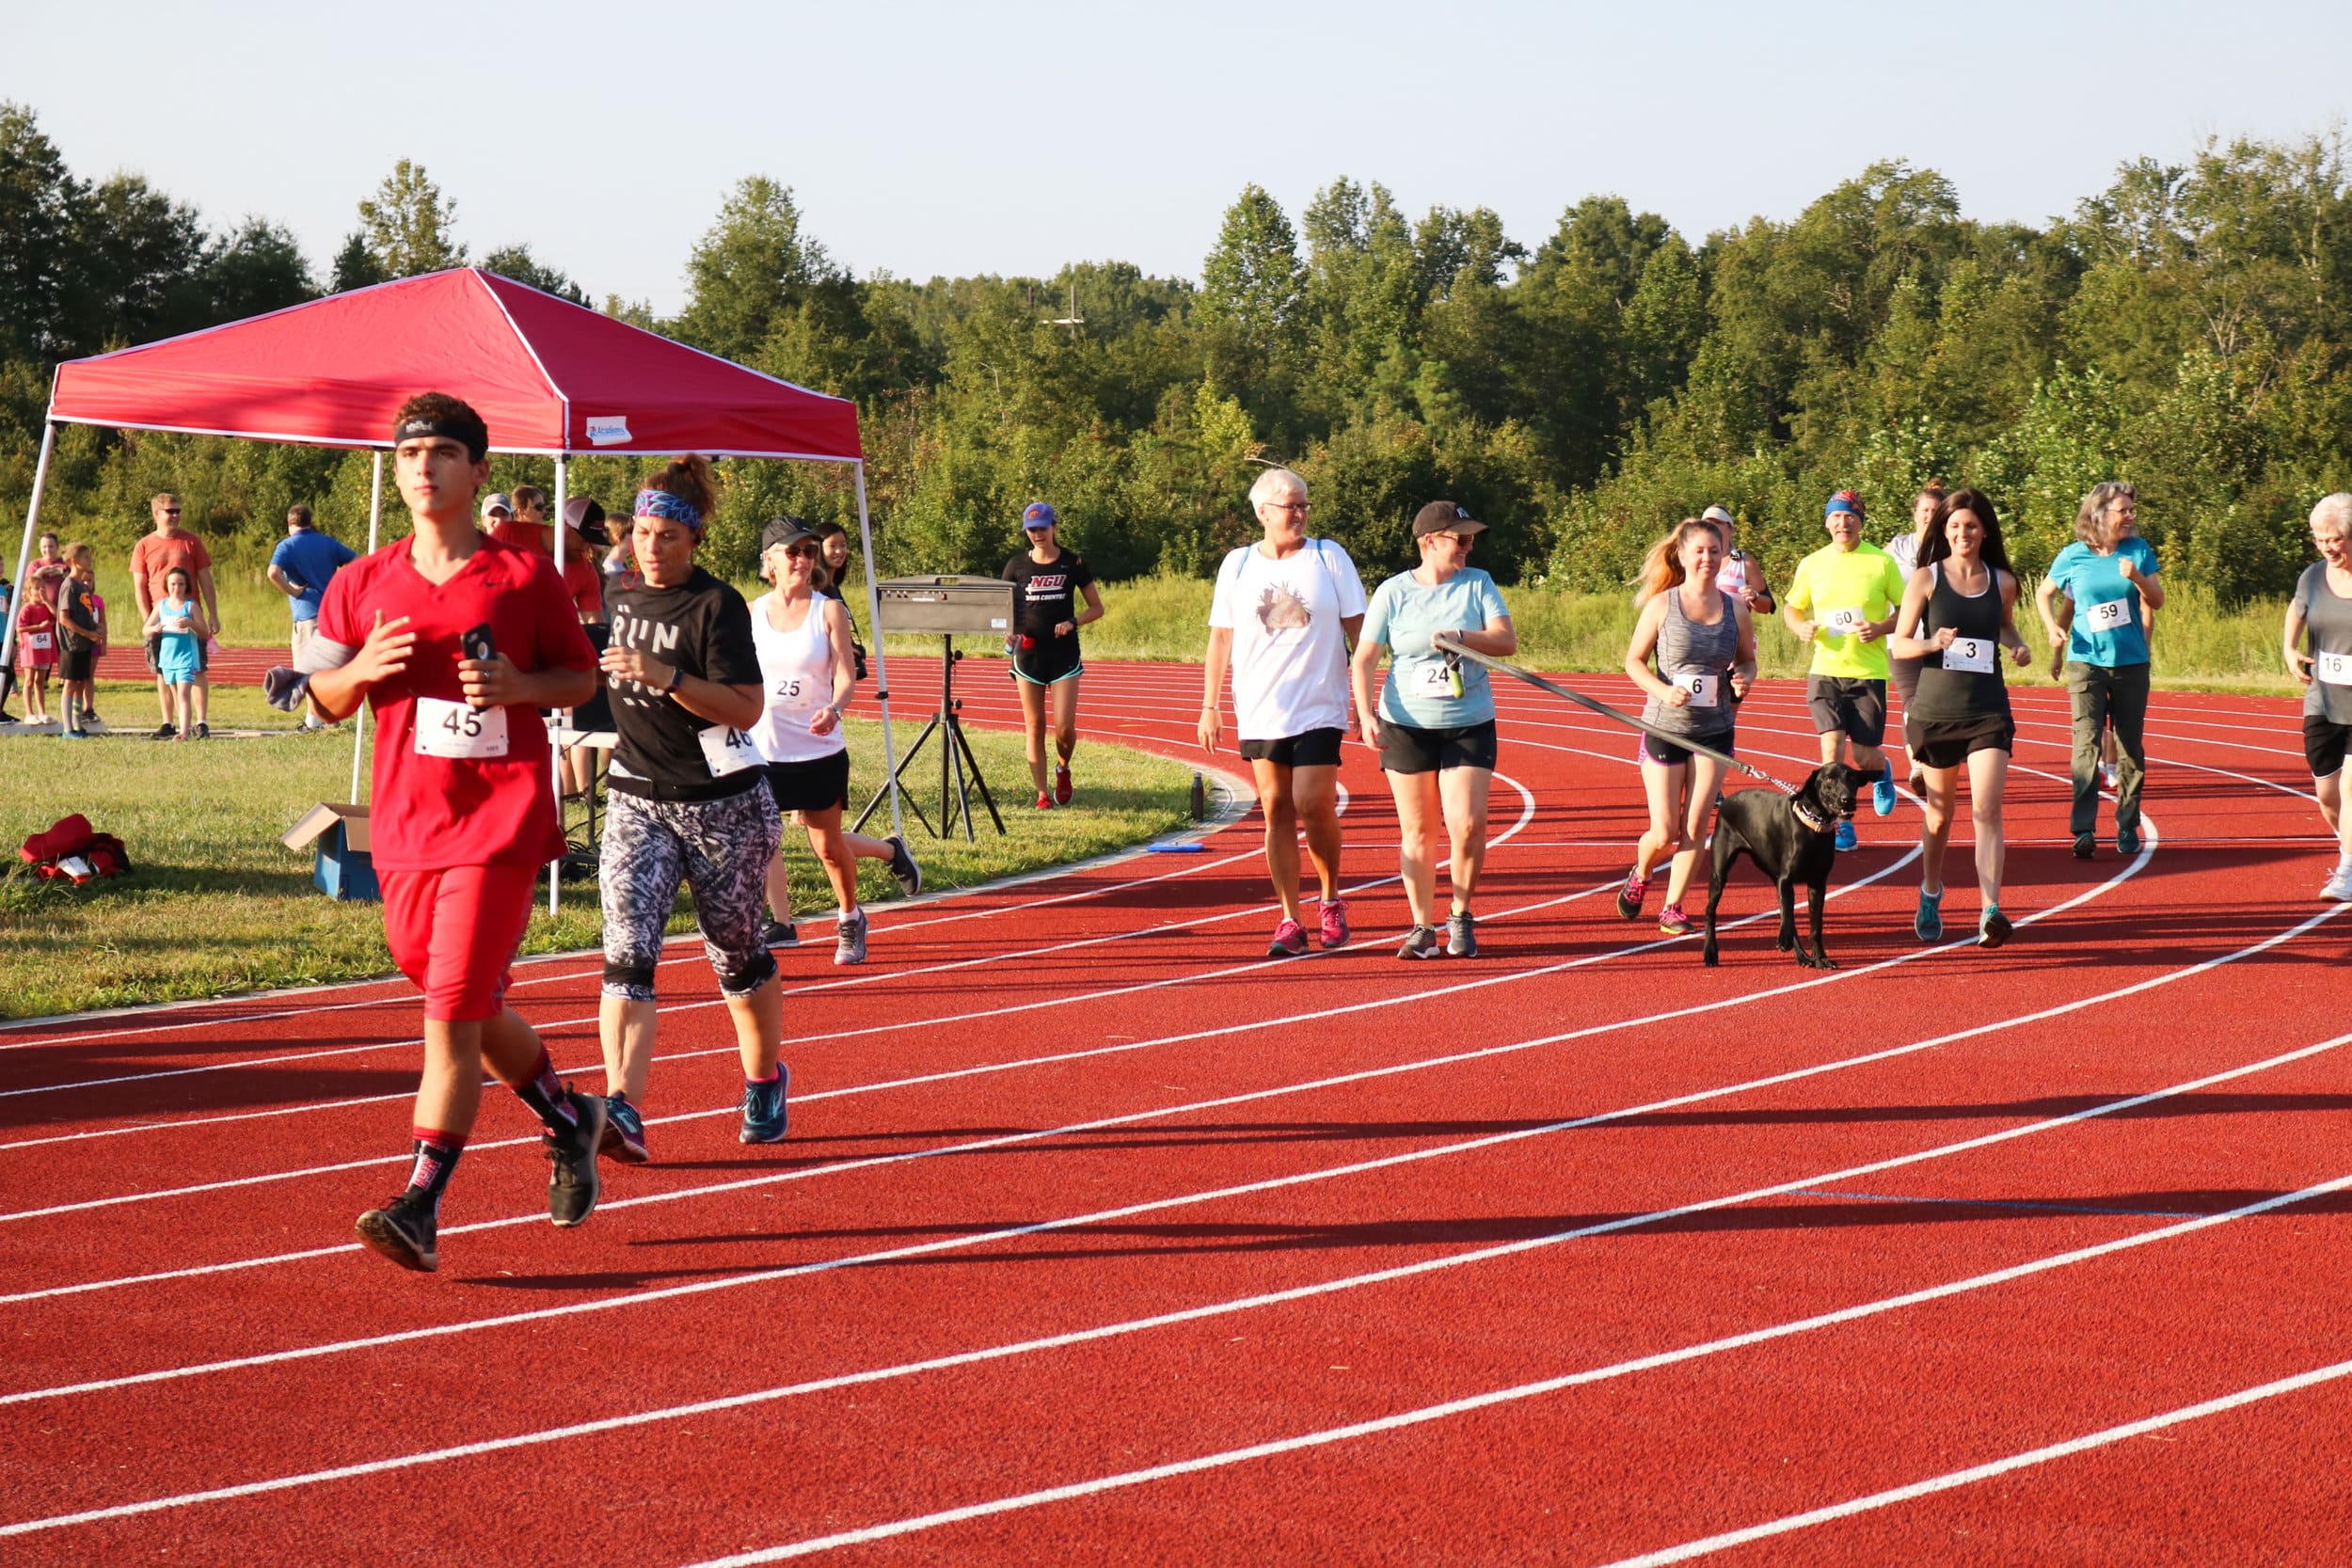 The participants in the 5k start their race around campus early Saturday morning.